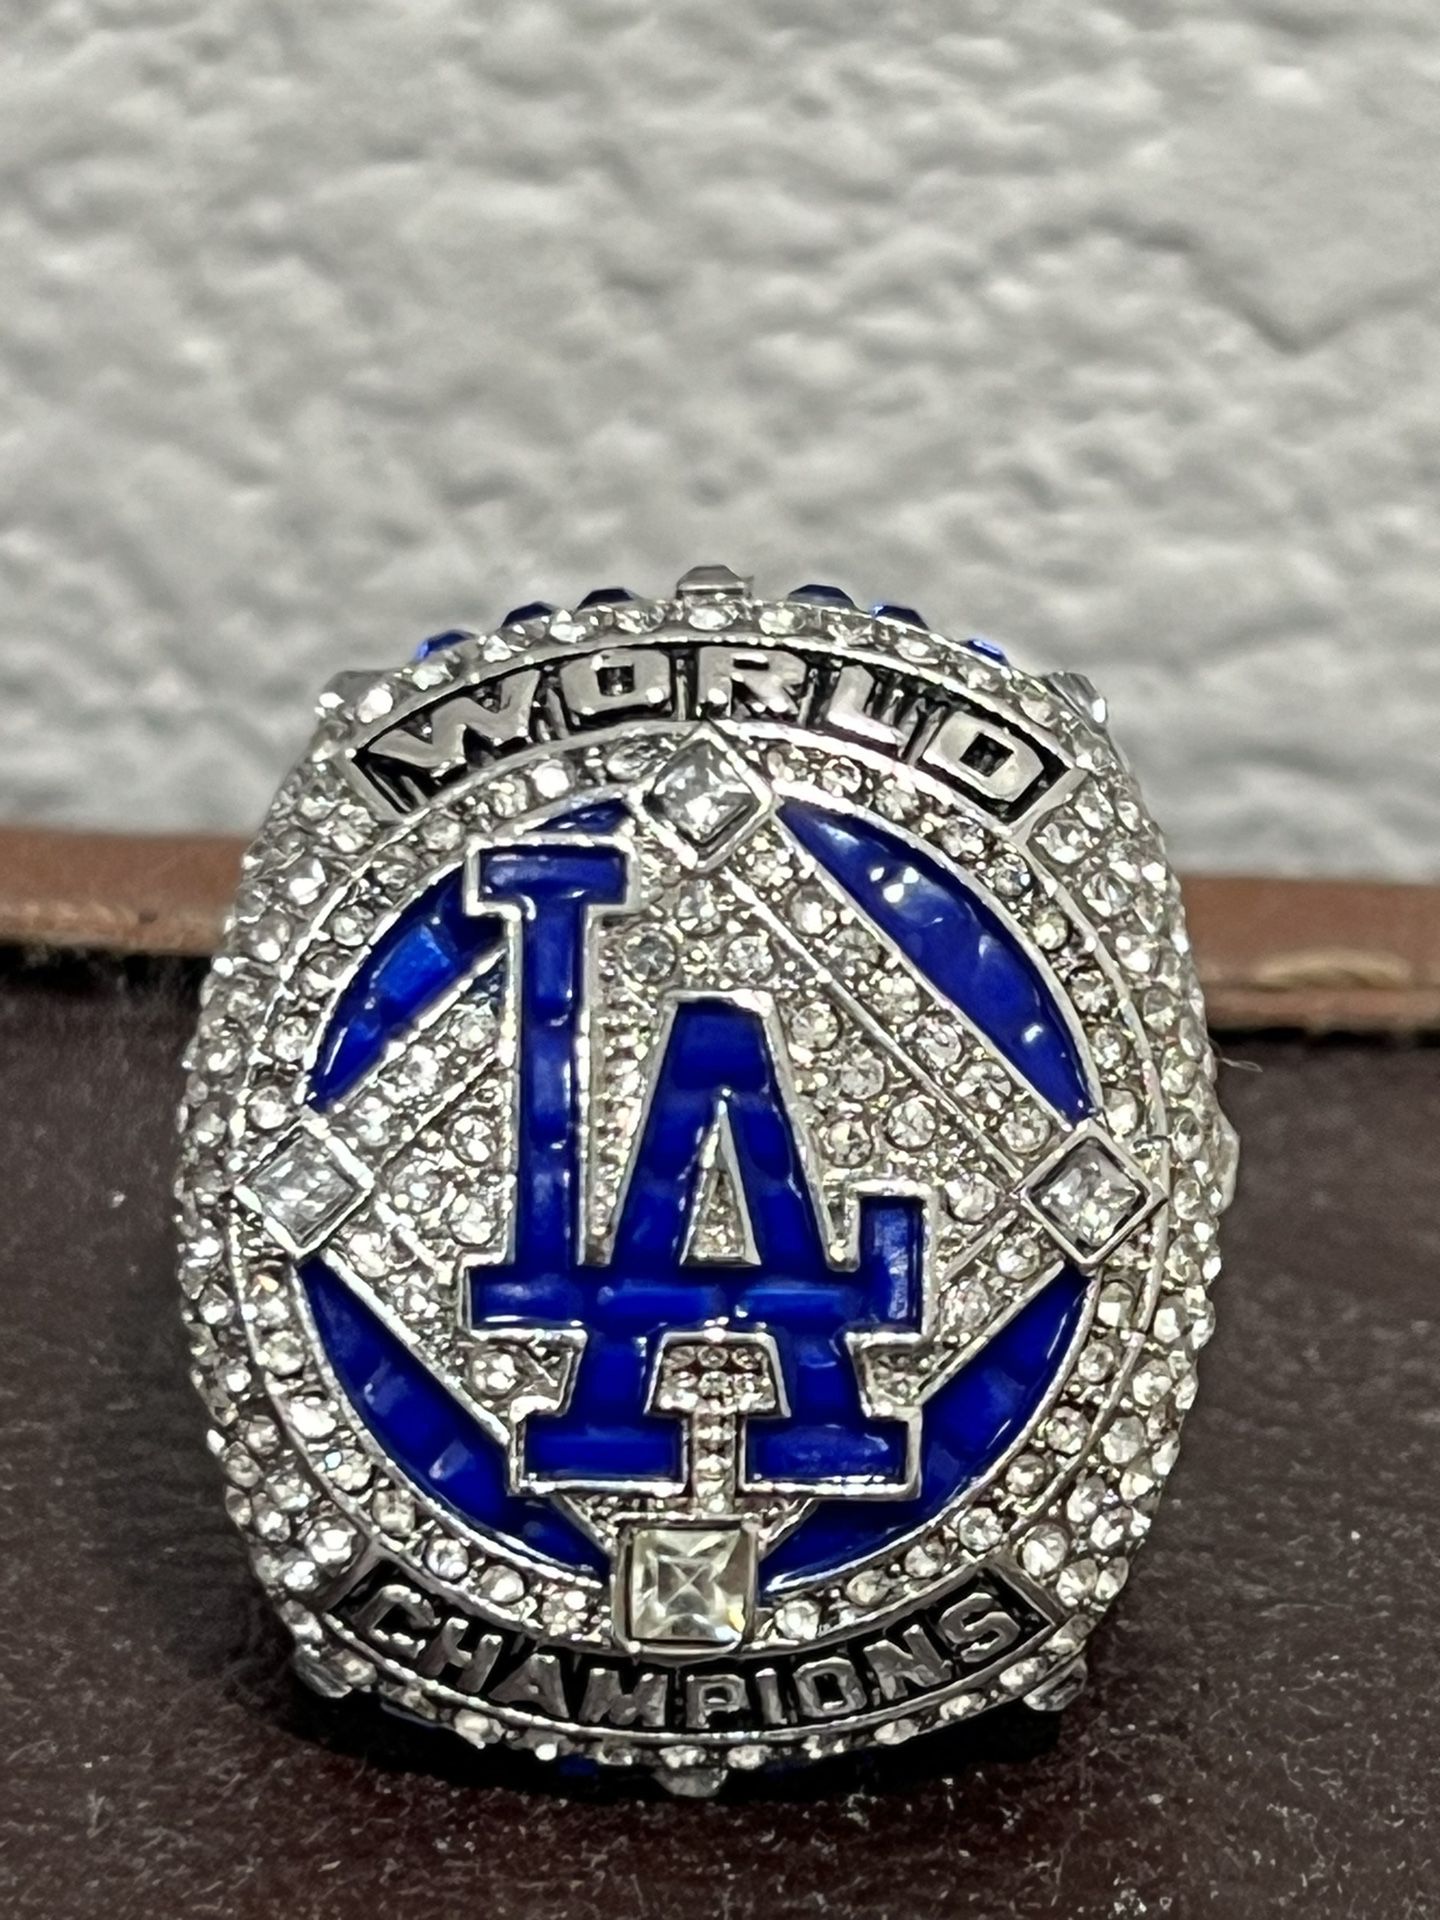 Dodgers World Series Seager Ring $10